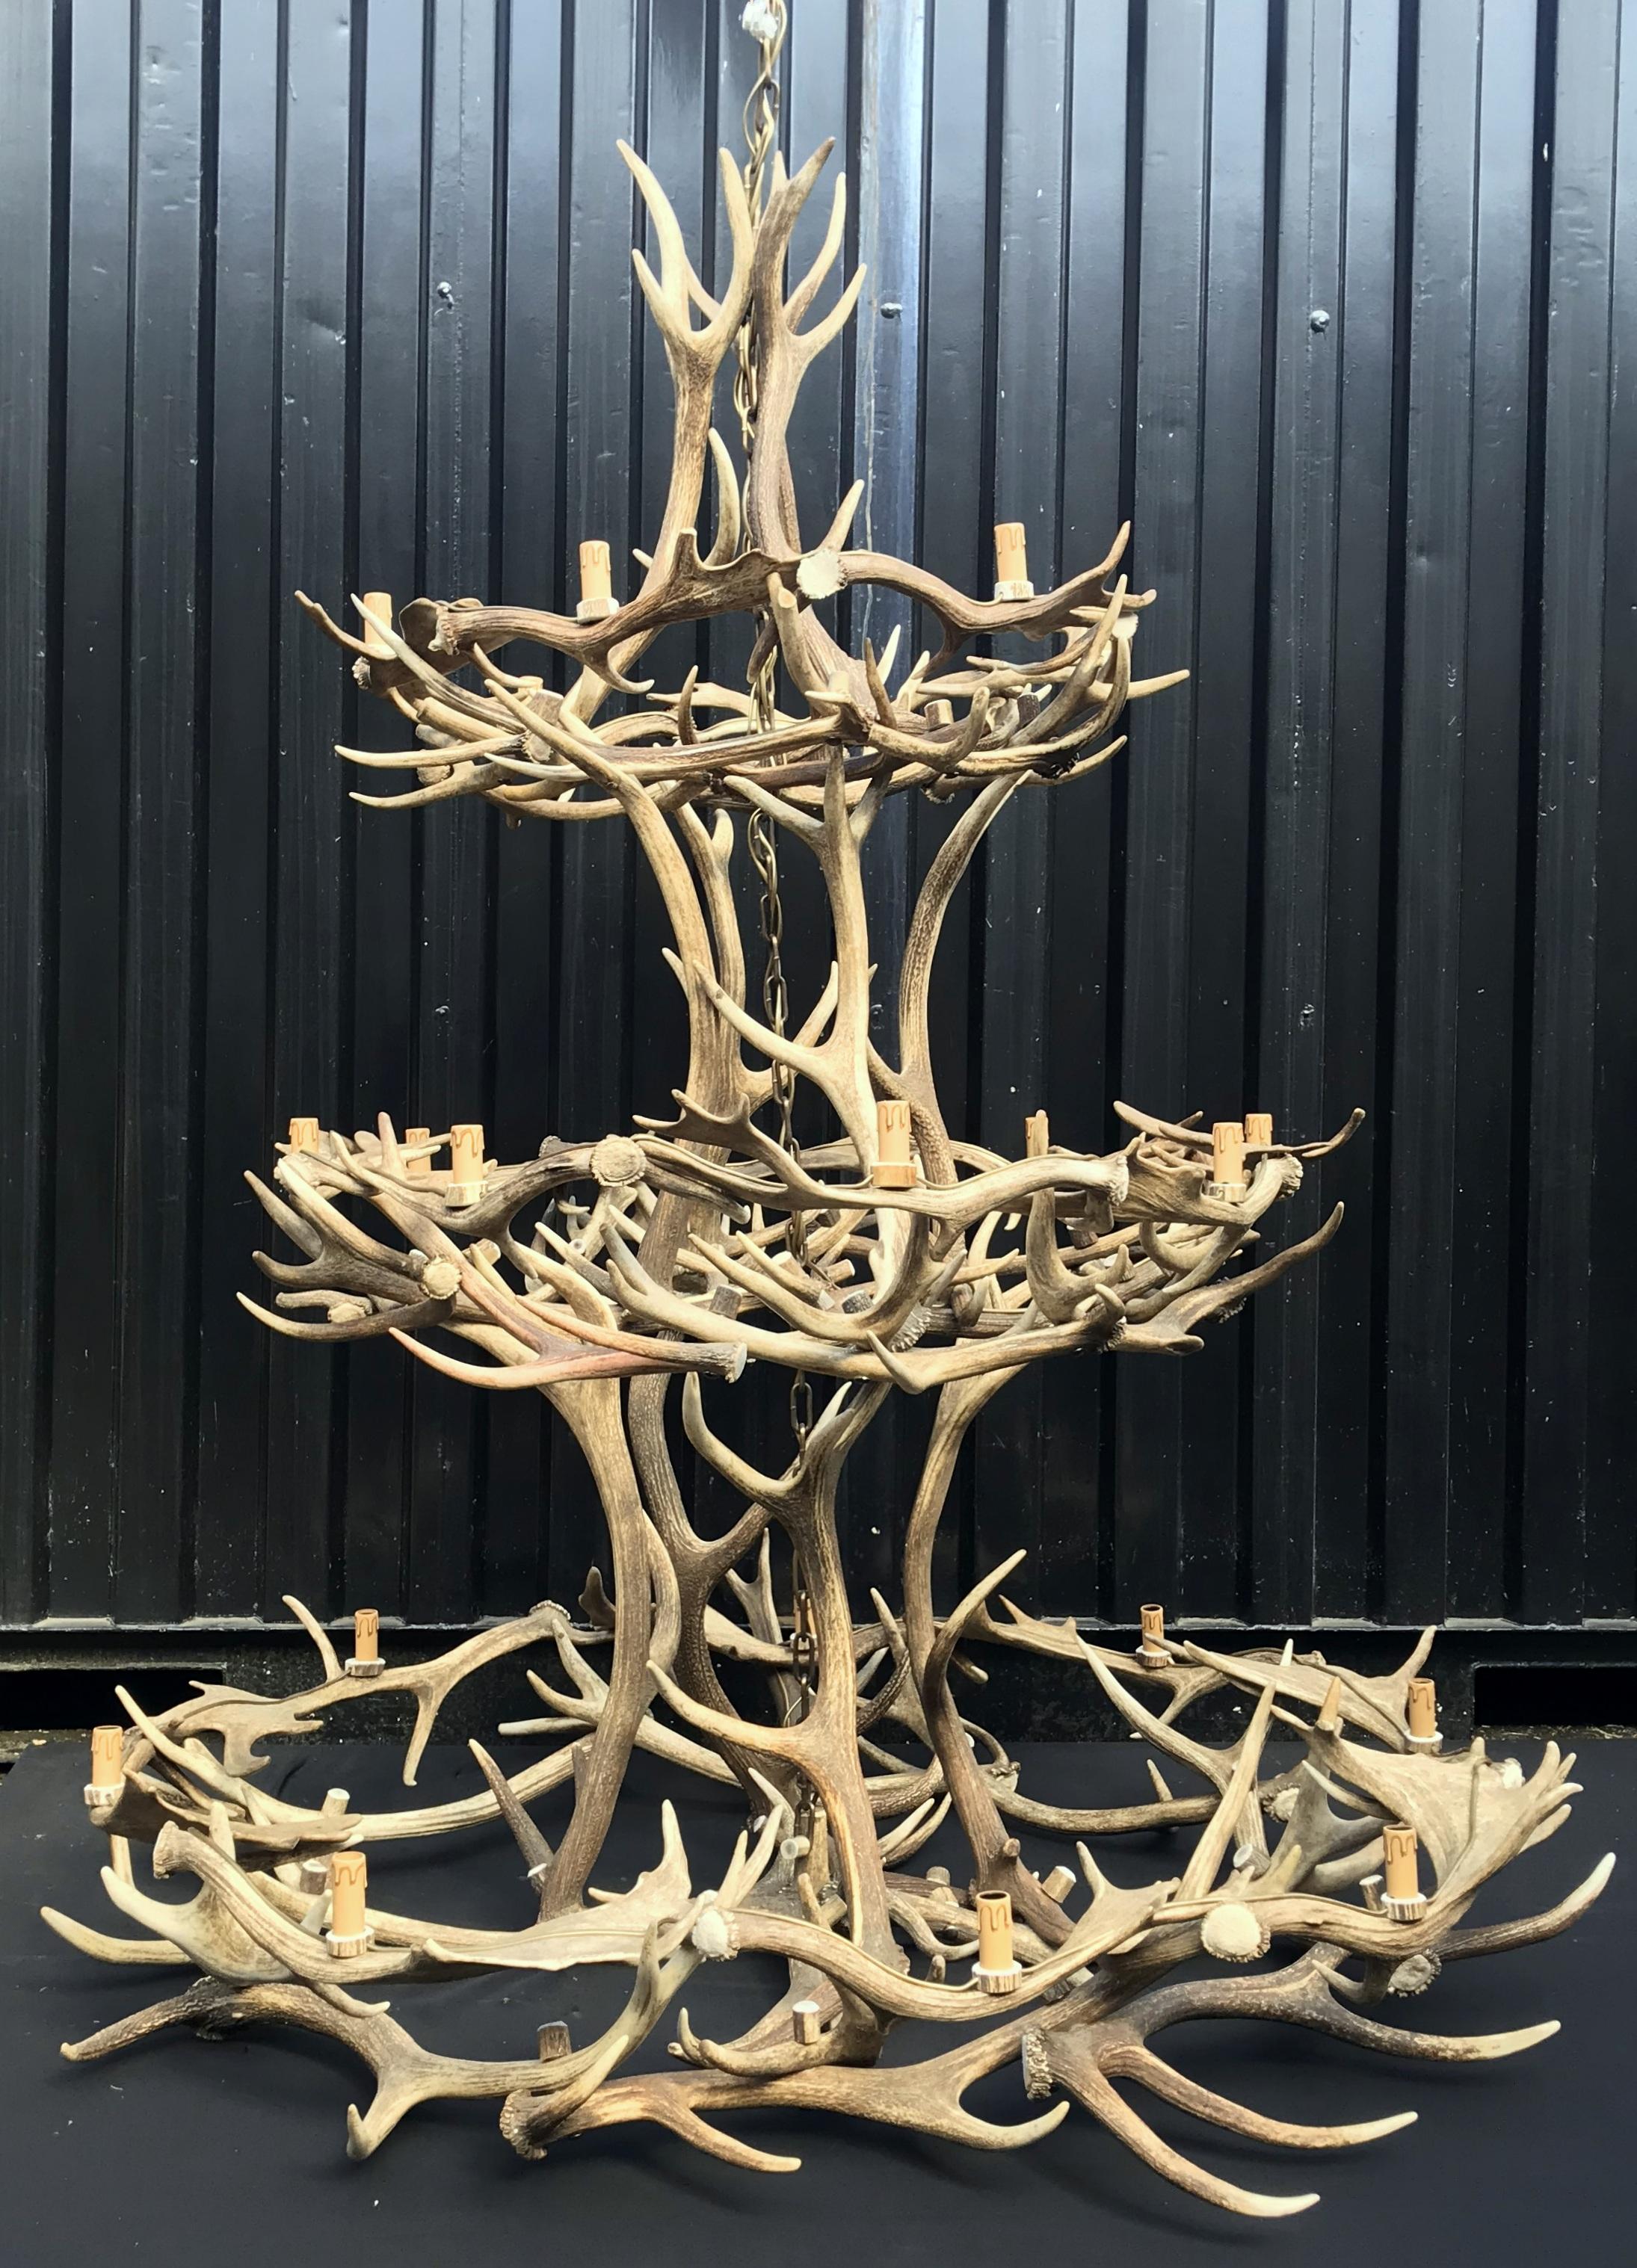 Imposing Chandelier Made of Antlers 1